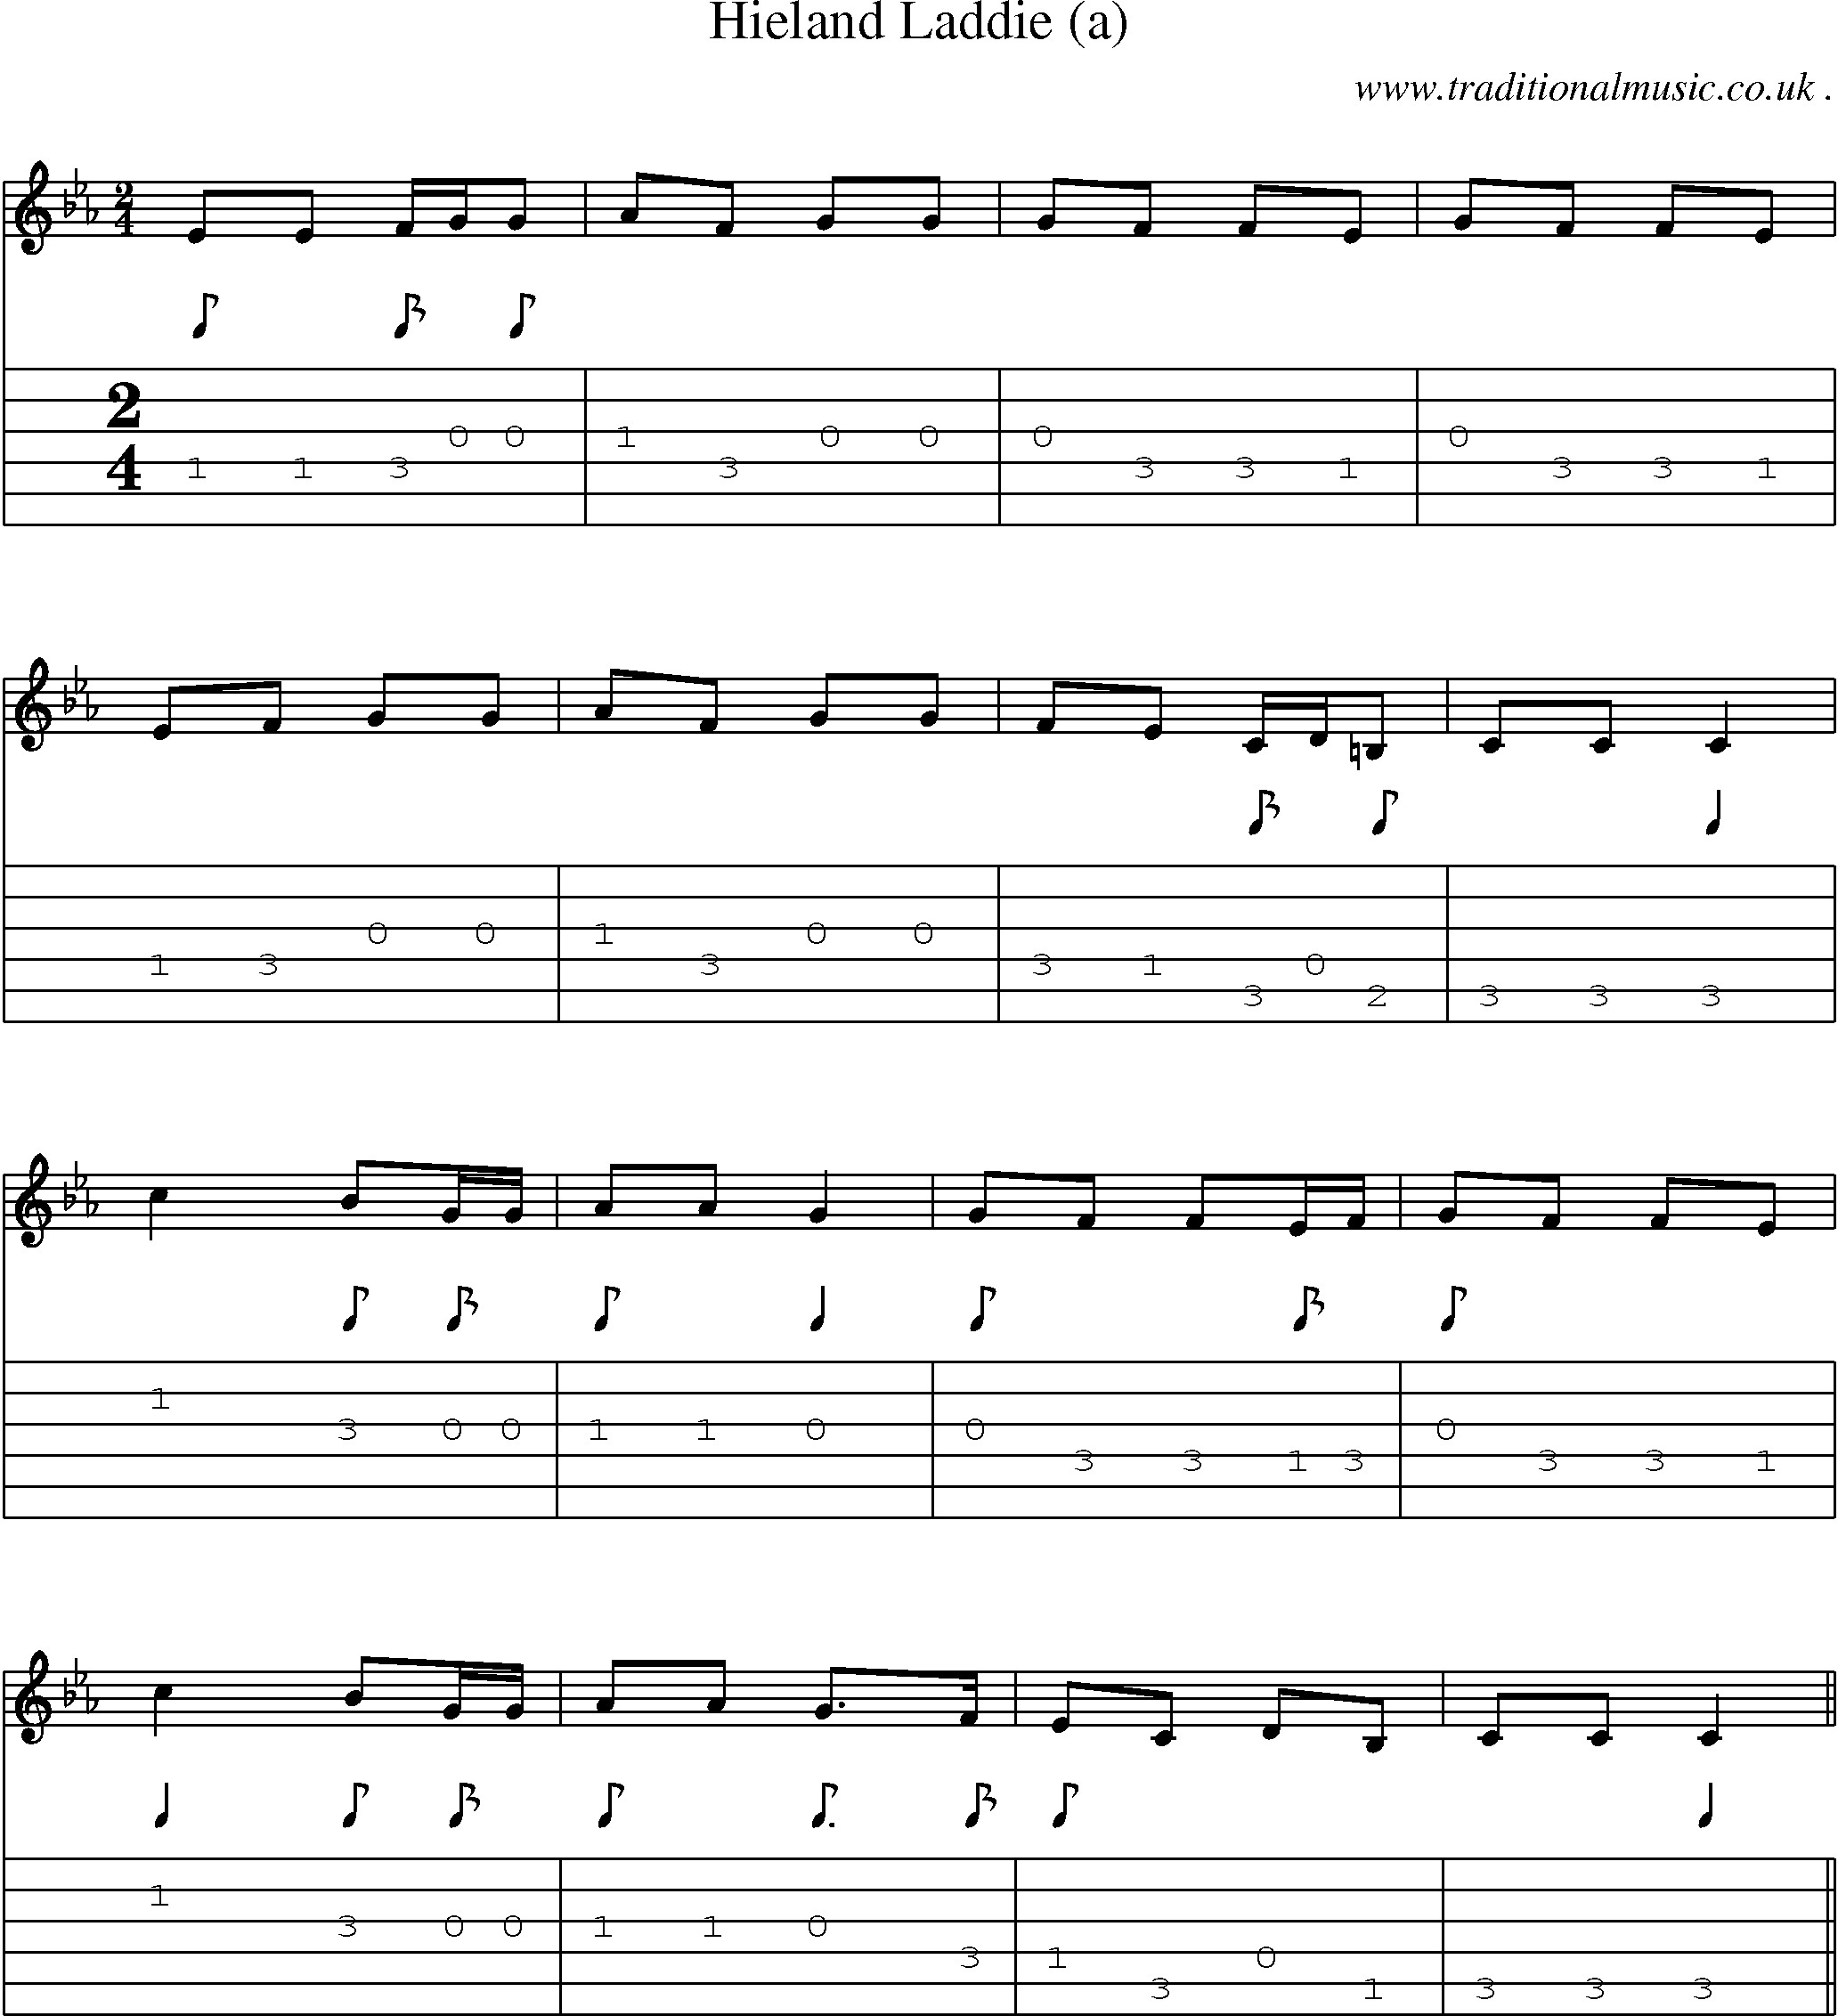 Sheet-Music and Guitar Tabs for Hieland Laddie (a)